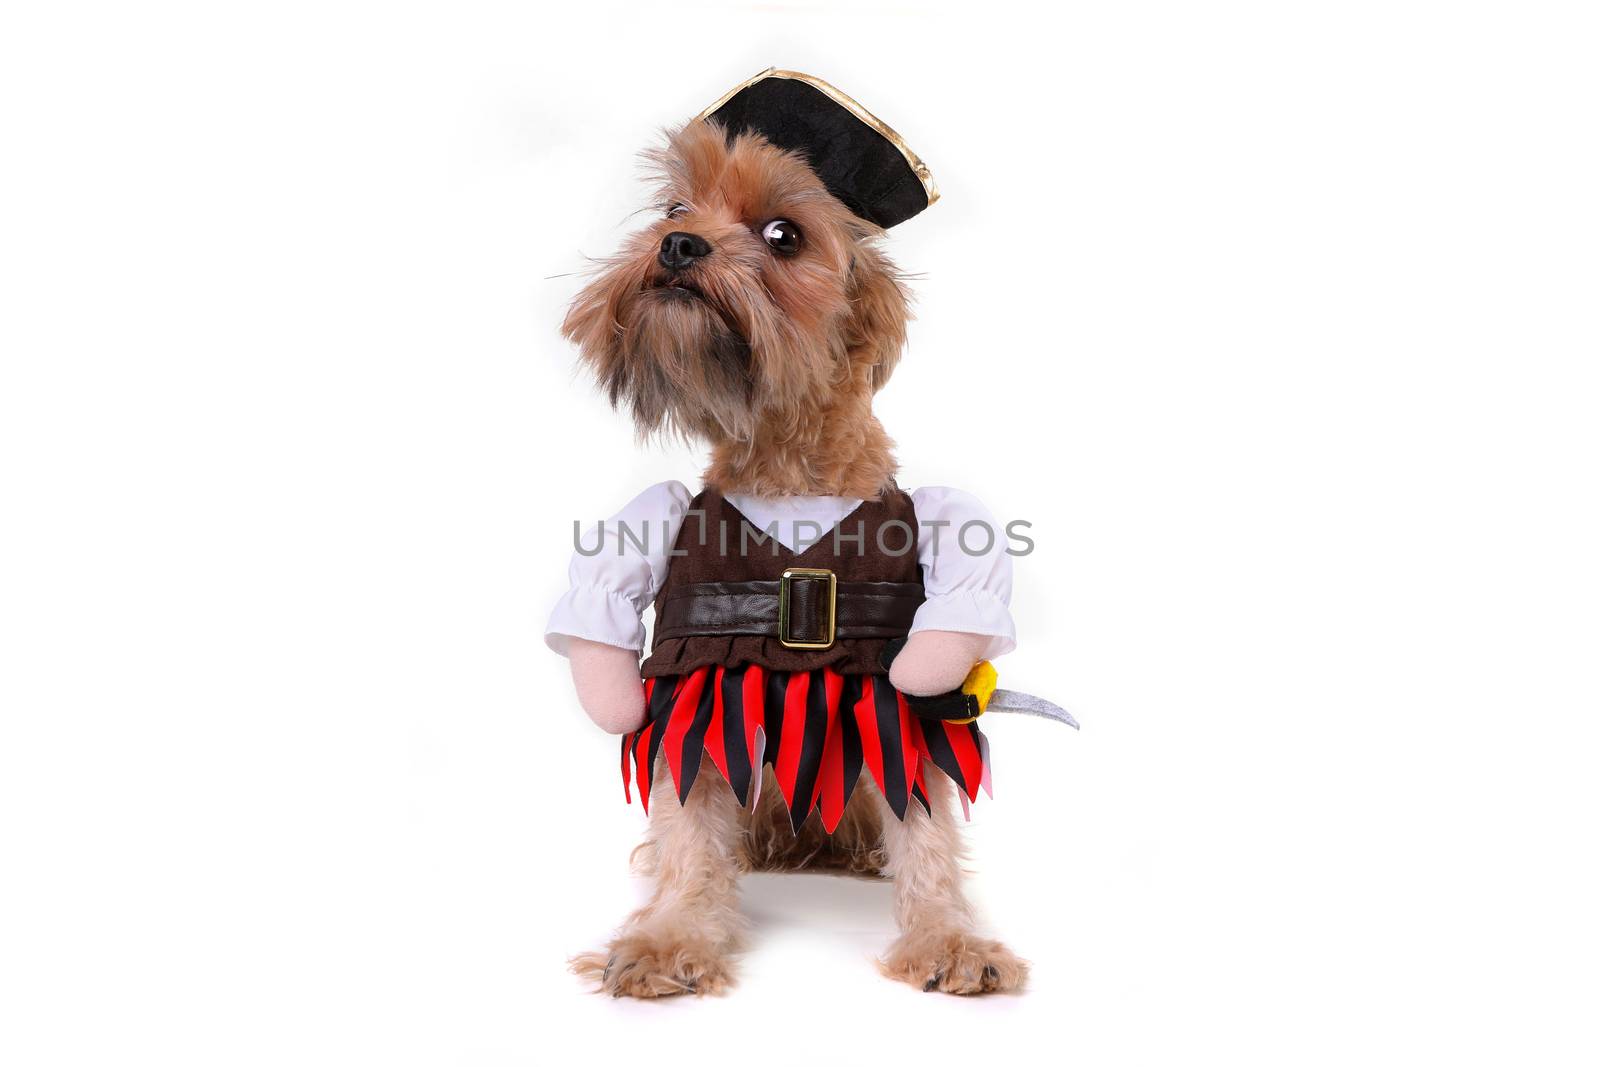 Mutt Dog in Pirate Inspired Clothing Costume